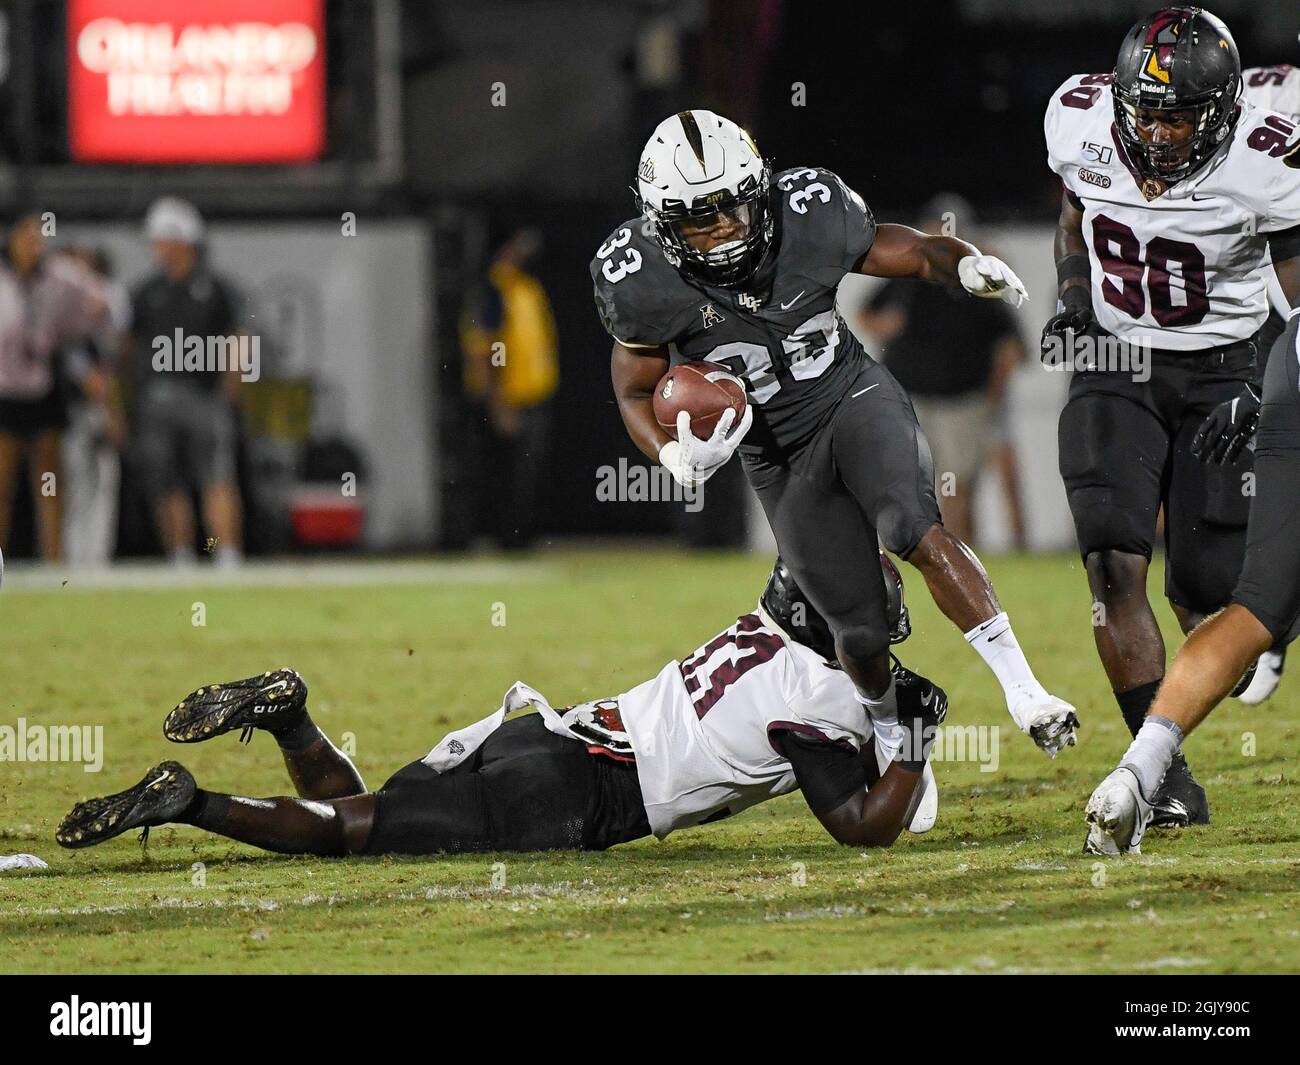 Orlando, FL, USA. 11th Sep, 2021. Central Florida running back Trillion Coles (33) during 2nd half NCAA football game between the Bethune Cookman Wildcats and the UCF Knights at the Bounce House in Orlando, Fl. Romeo Guzman/Bethune Cookman Athletics. Credit: csm/Alamy Live News Stock Photo